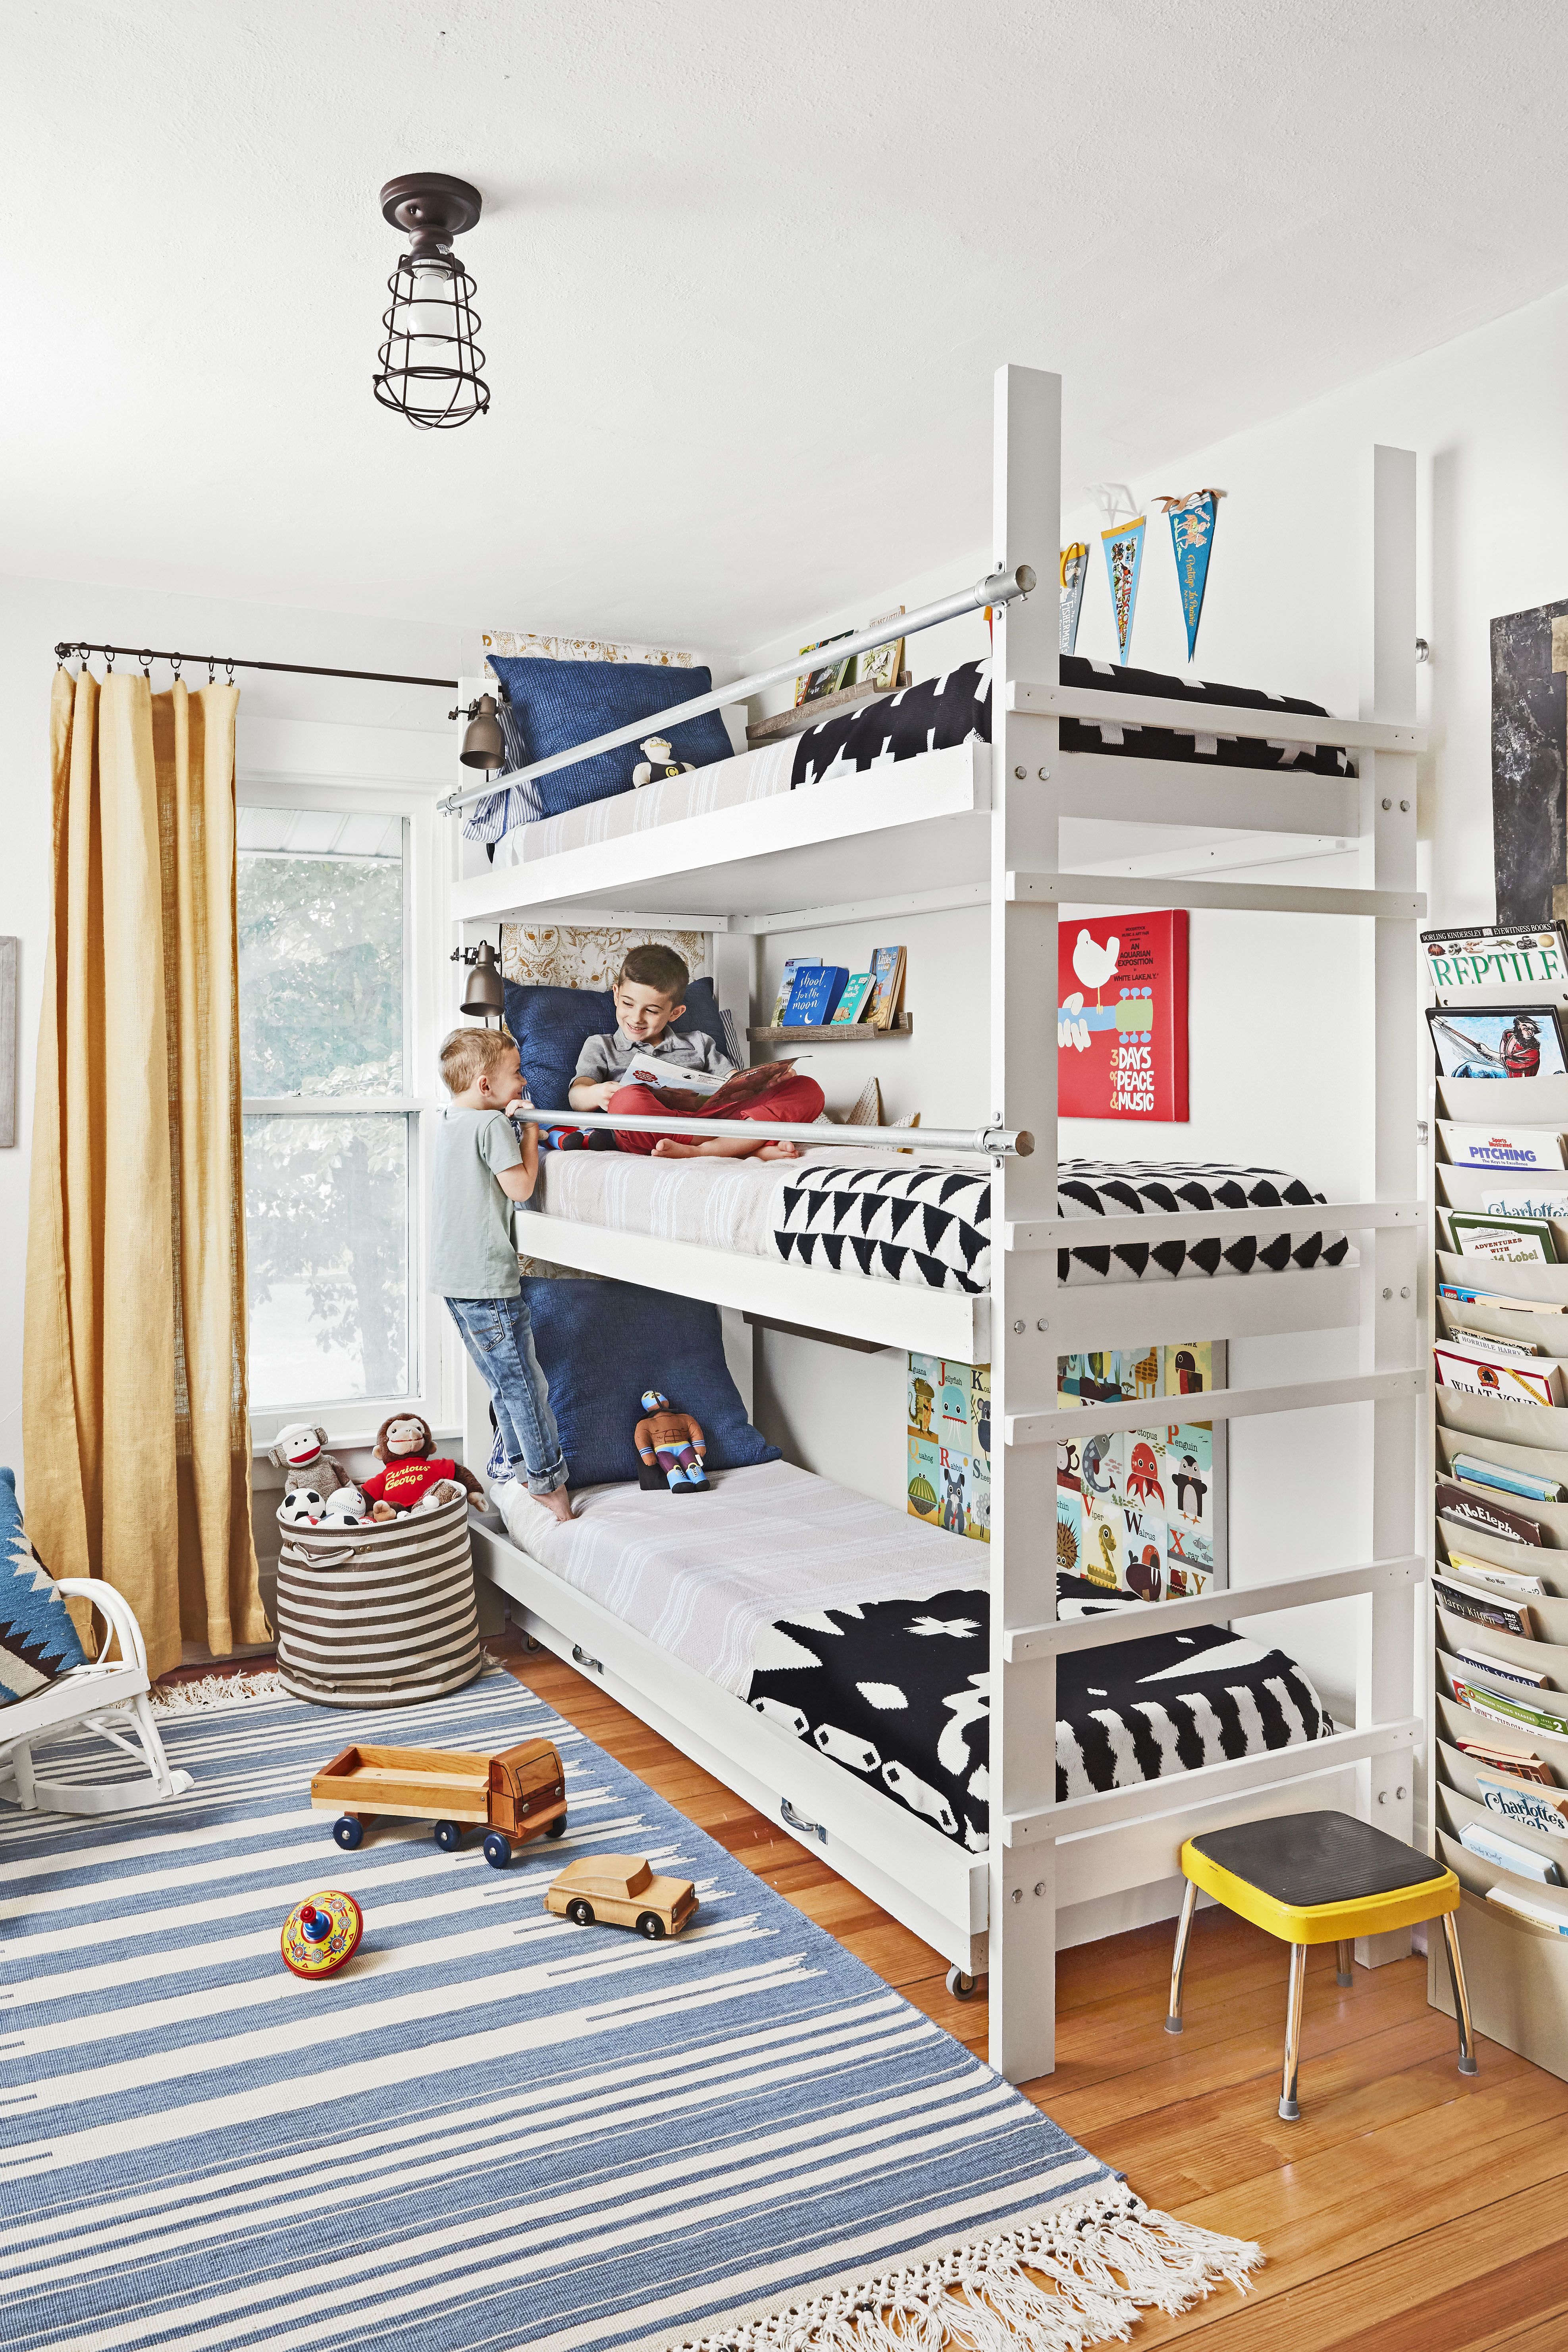 30 Best Kids Room Ideas Diy Boys And, Cute Bedroom Ideas With Bunk Beds